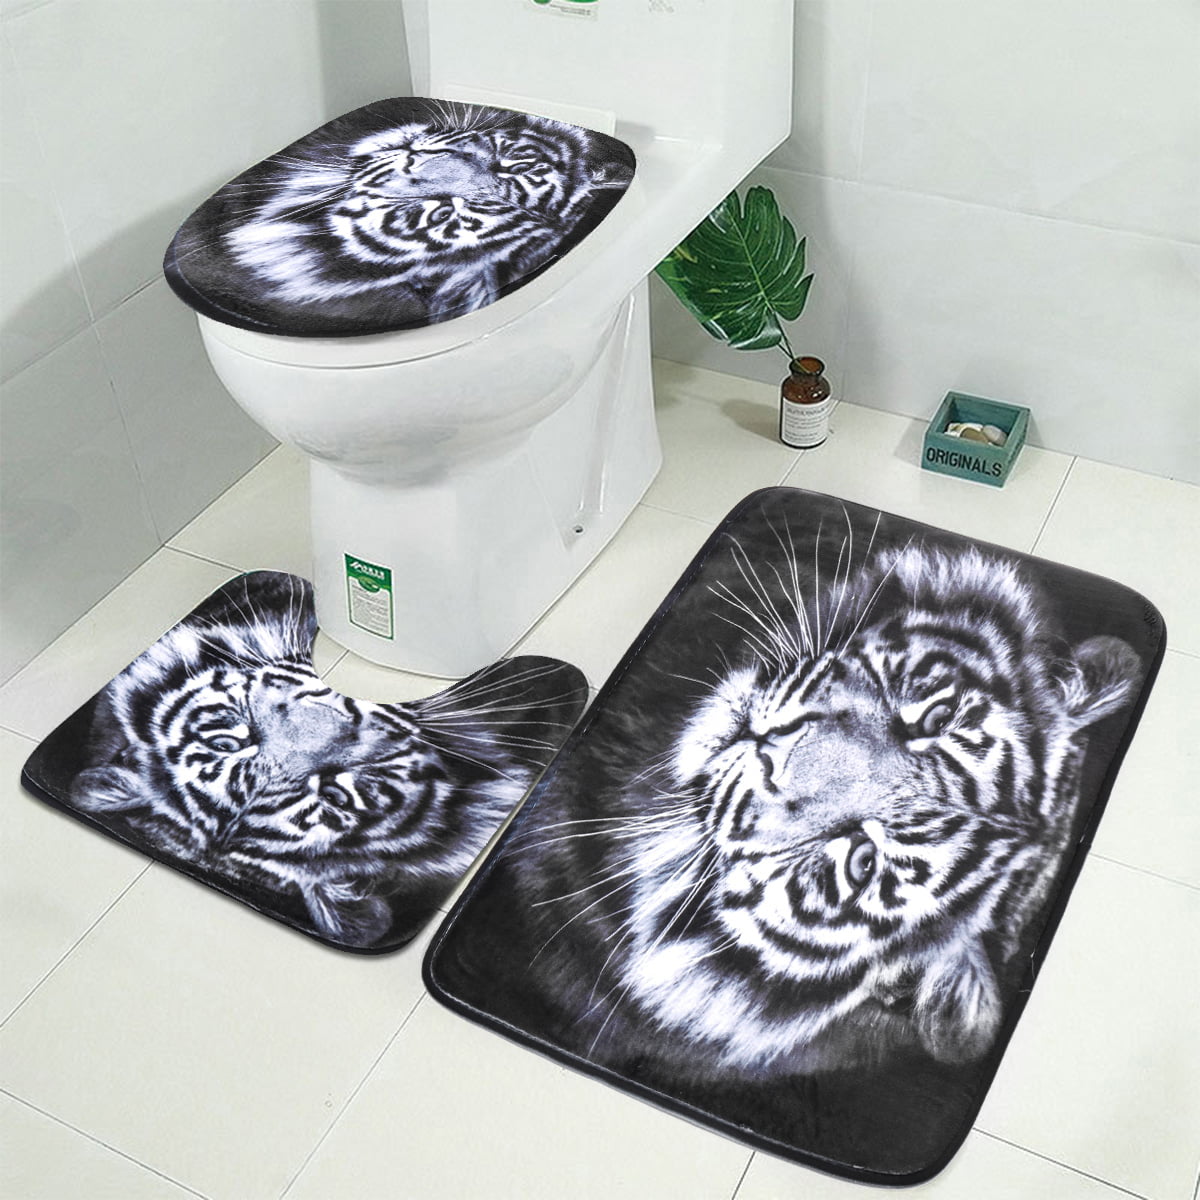 Animals Wolf Tiger Peacock Lion Shower Curtain Bath Rug Set Toilet Cover Set 